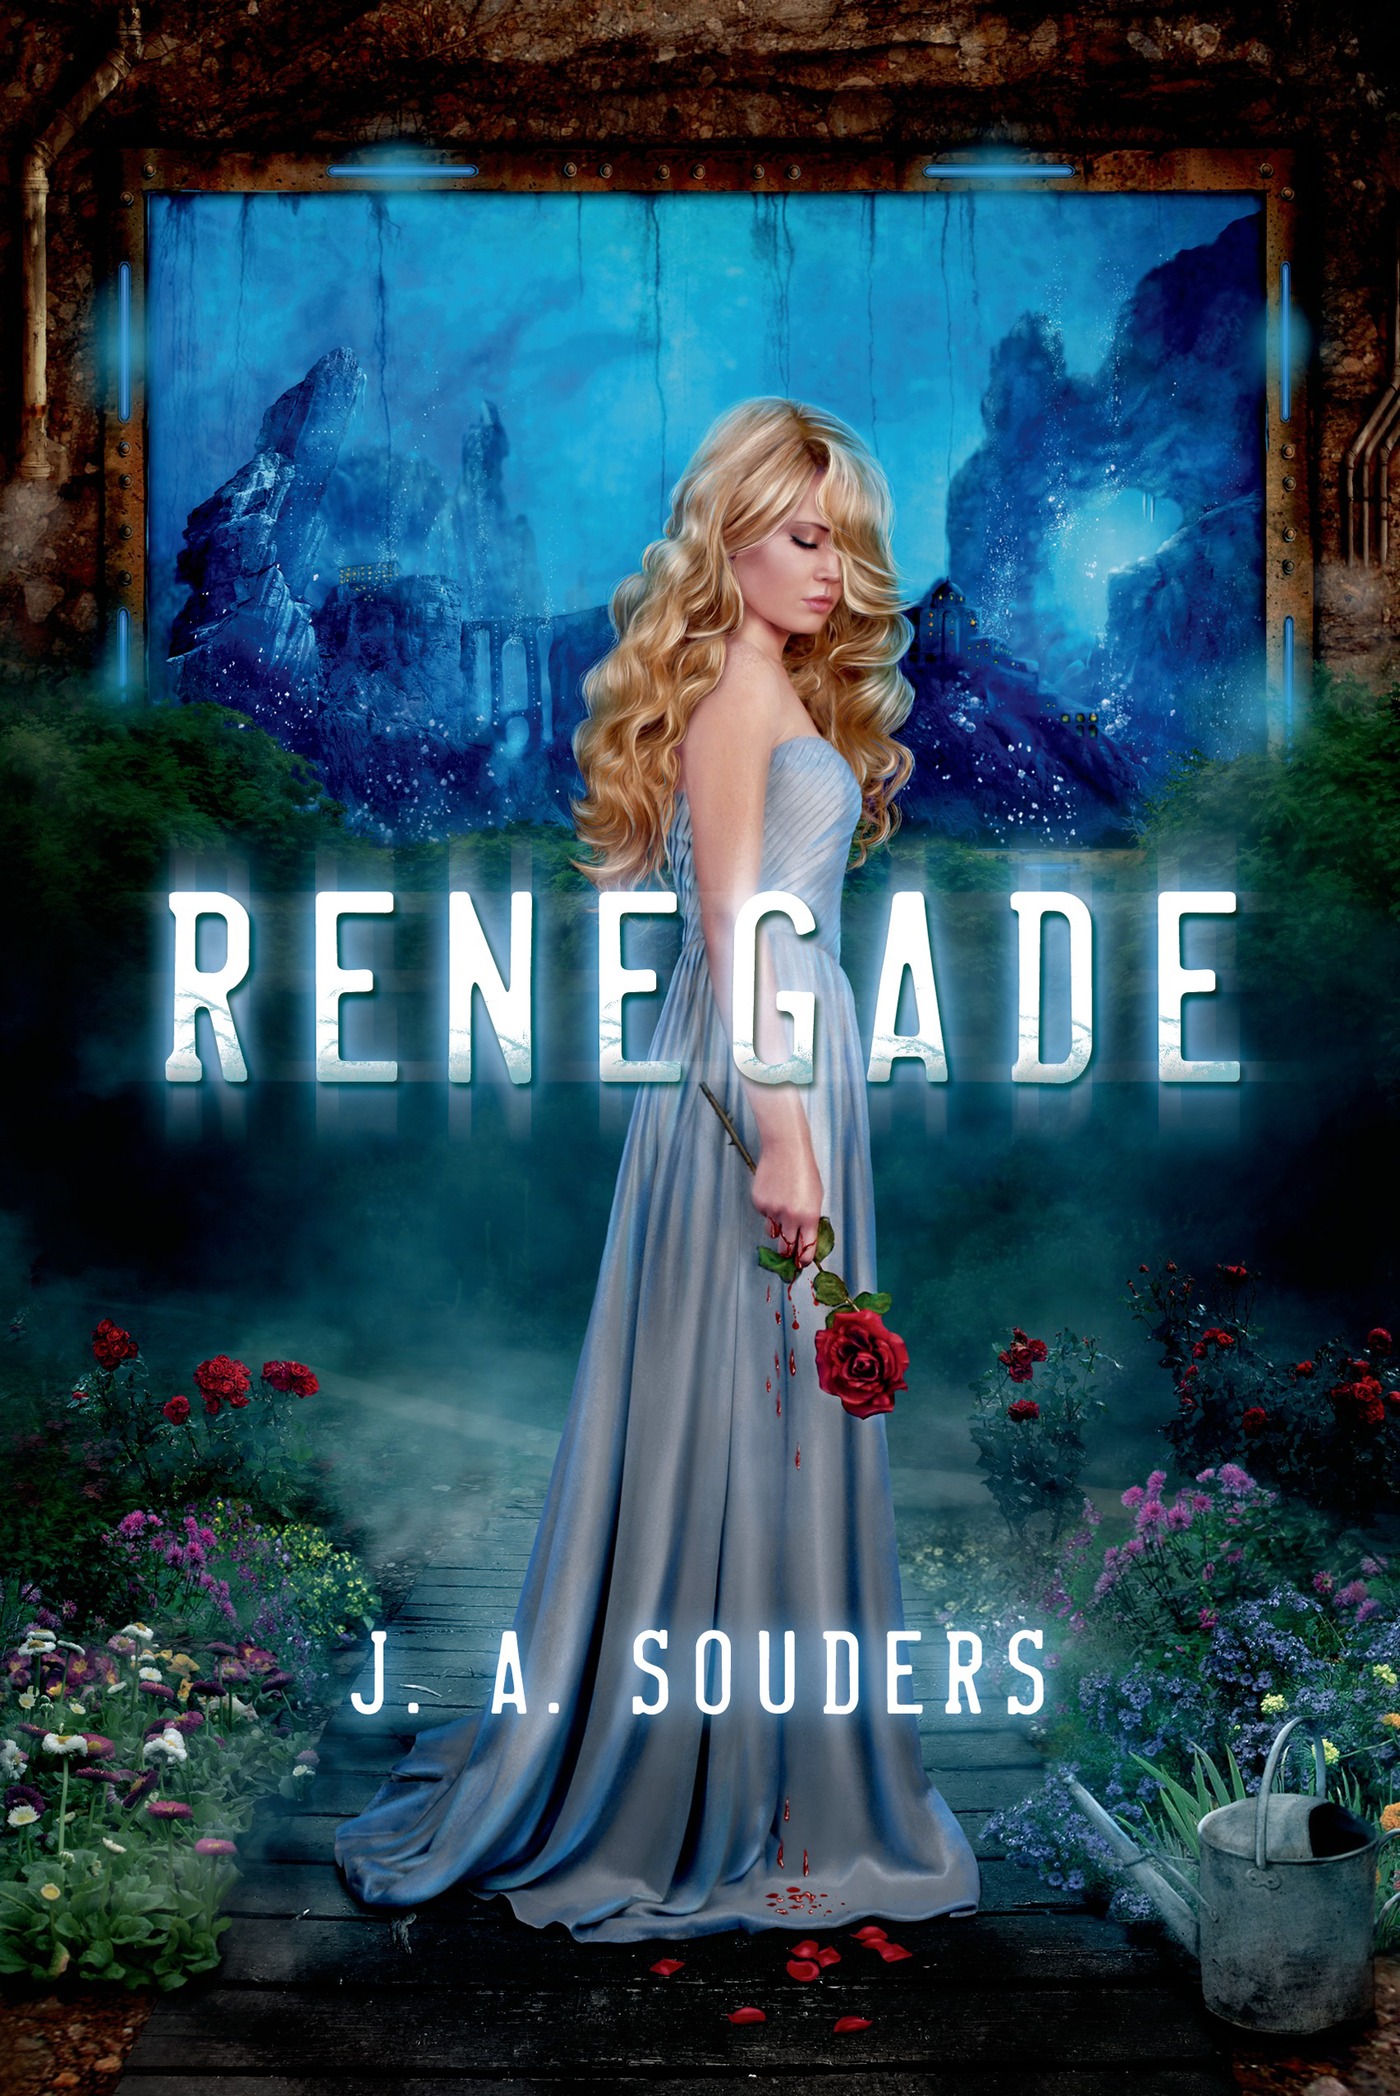 Renegade by J. A. Souders